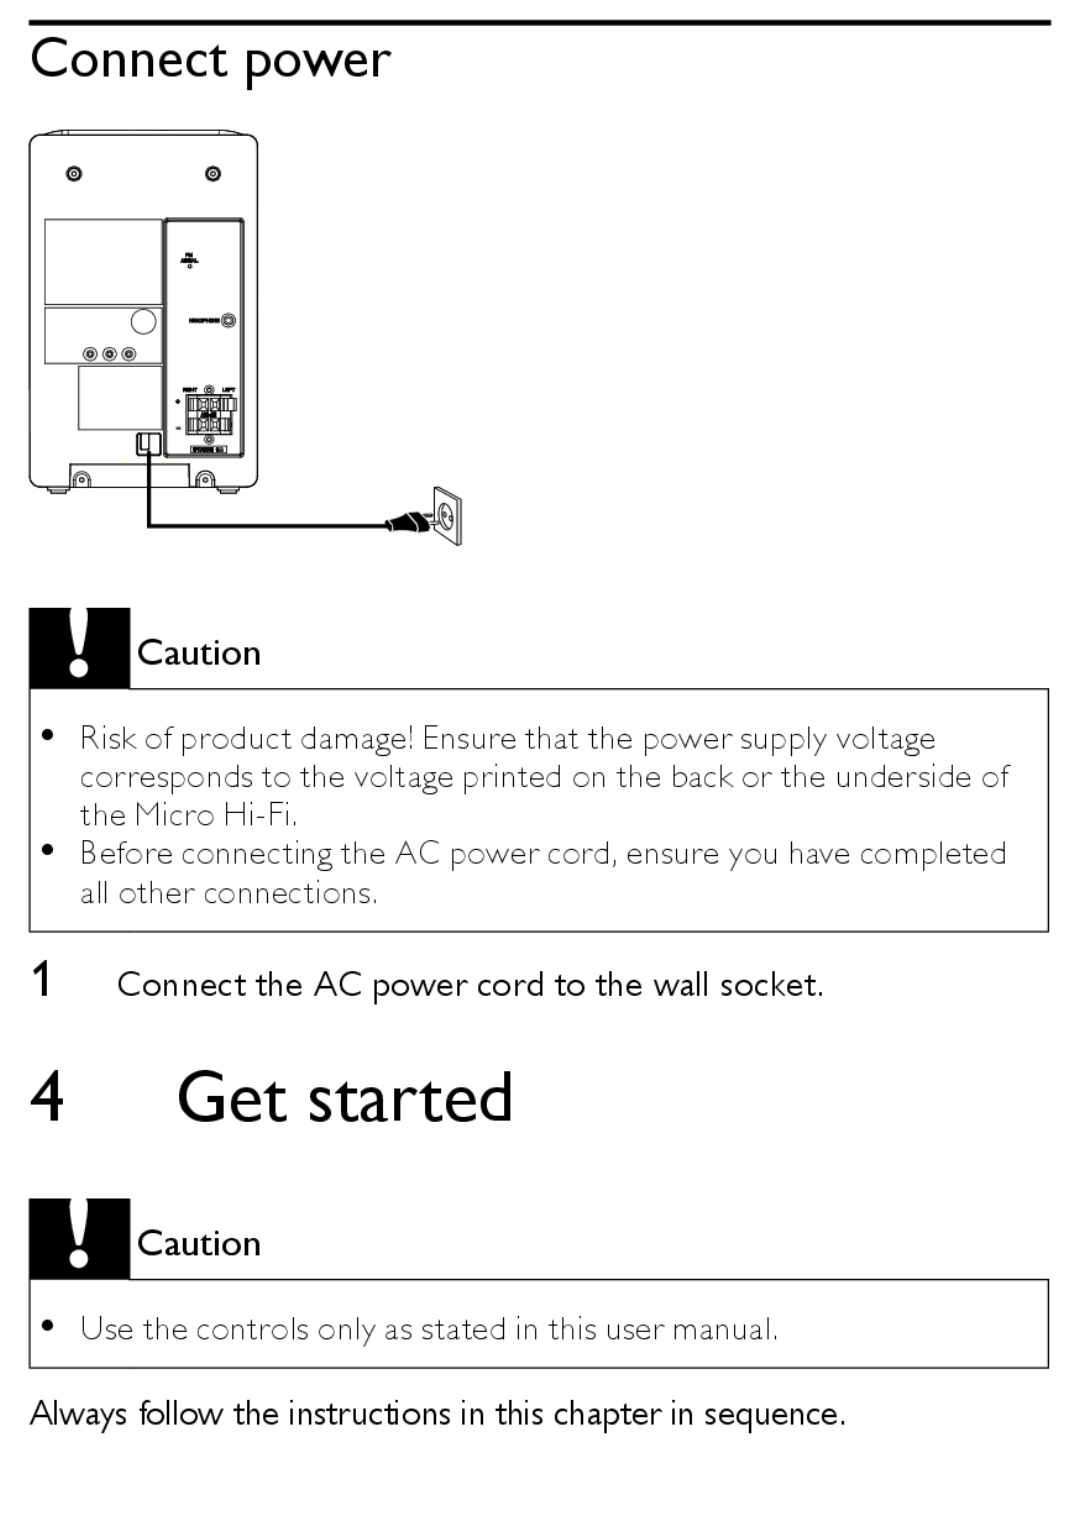 Philips MCM167 user manual Get started, Connect power 